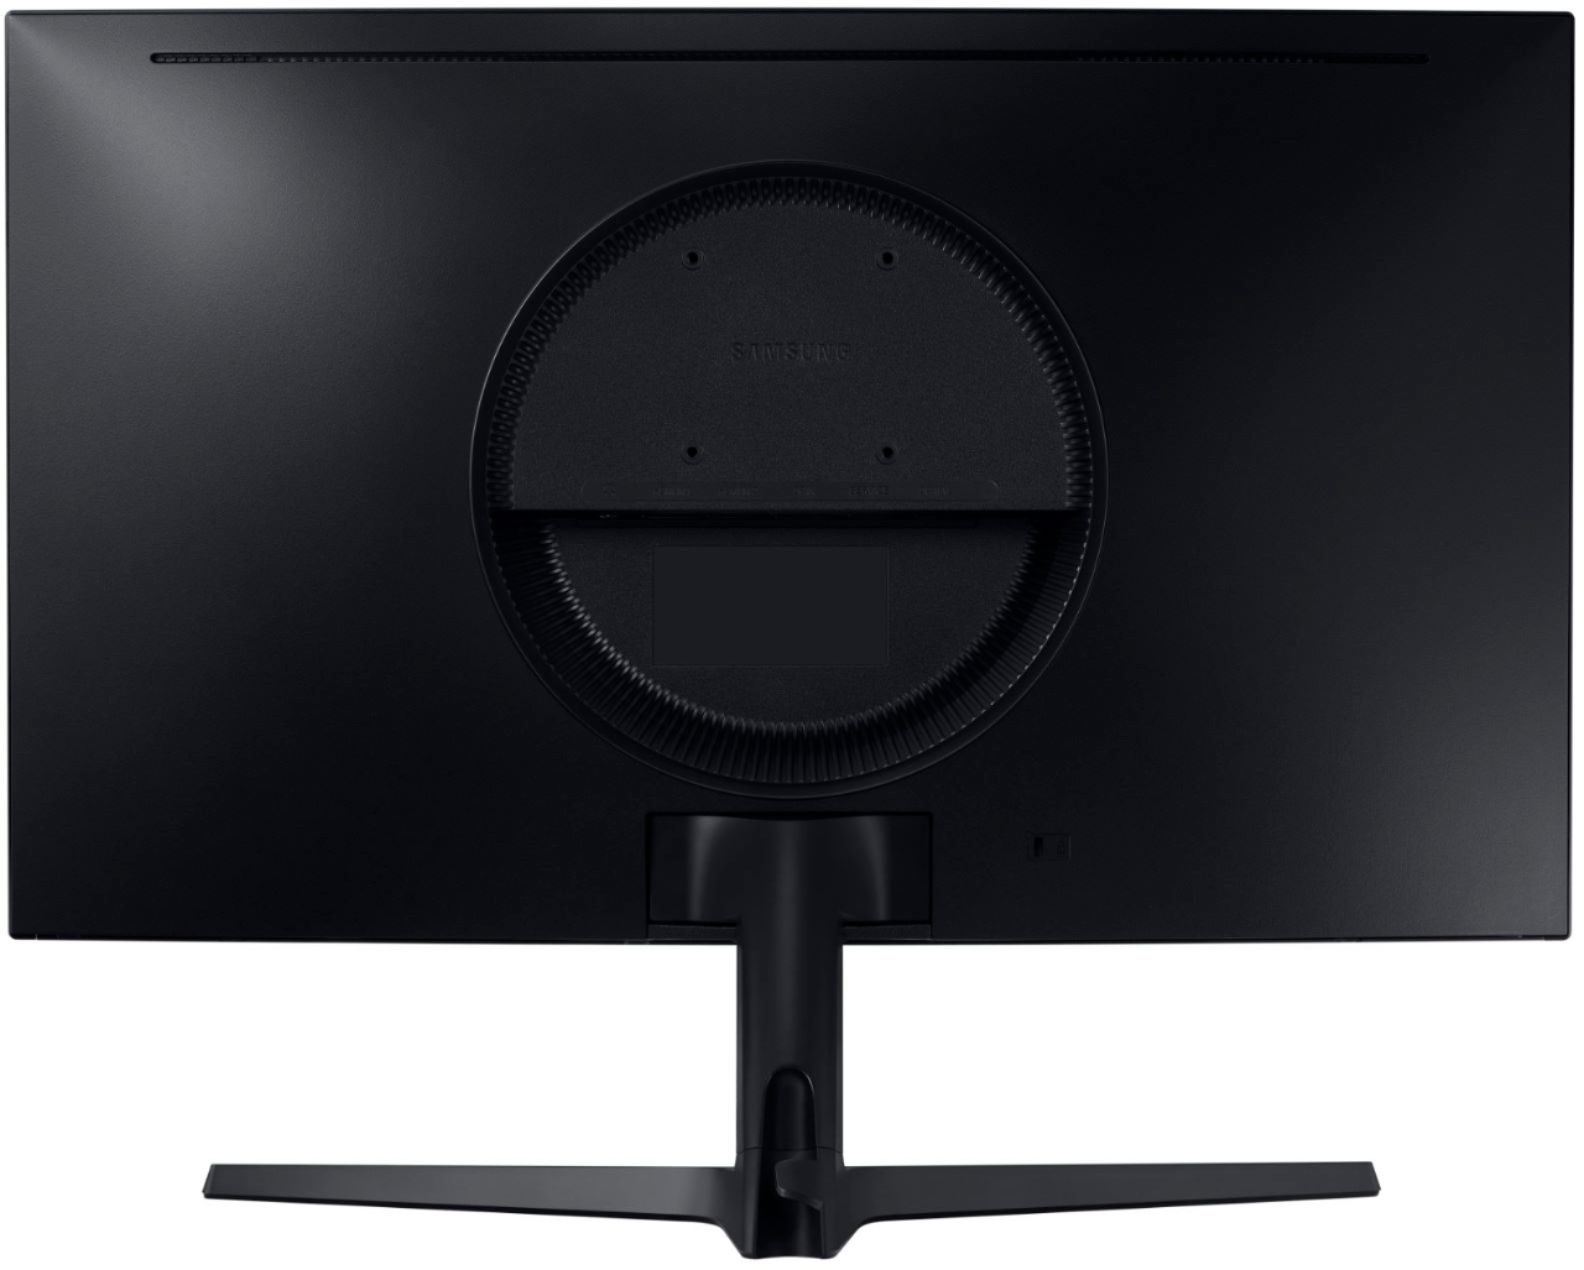 Back View: Samsung - Geek Squad Certified Refurbished CRG5 Series 27" LED Curved FHD G-Sync Monitor - Dark Blue/Gray